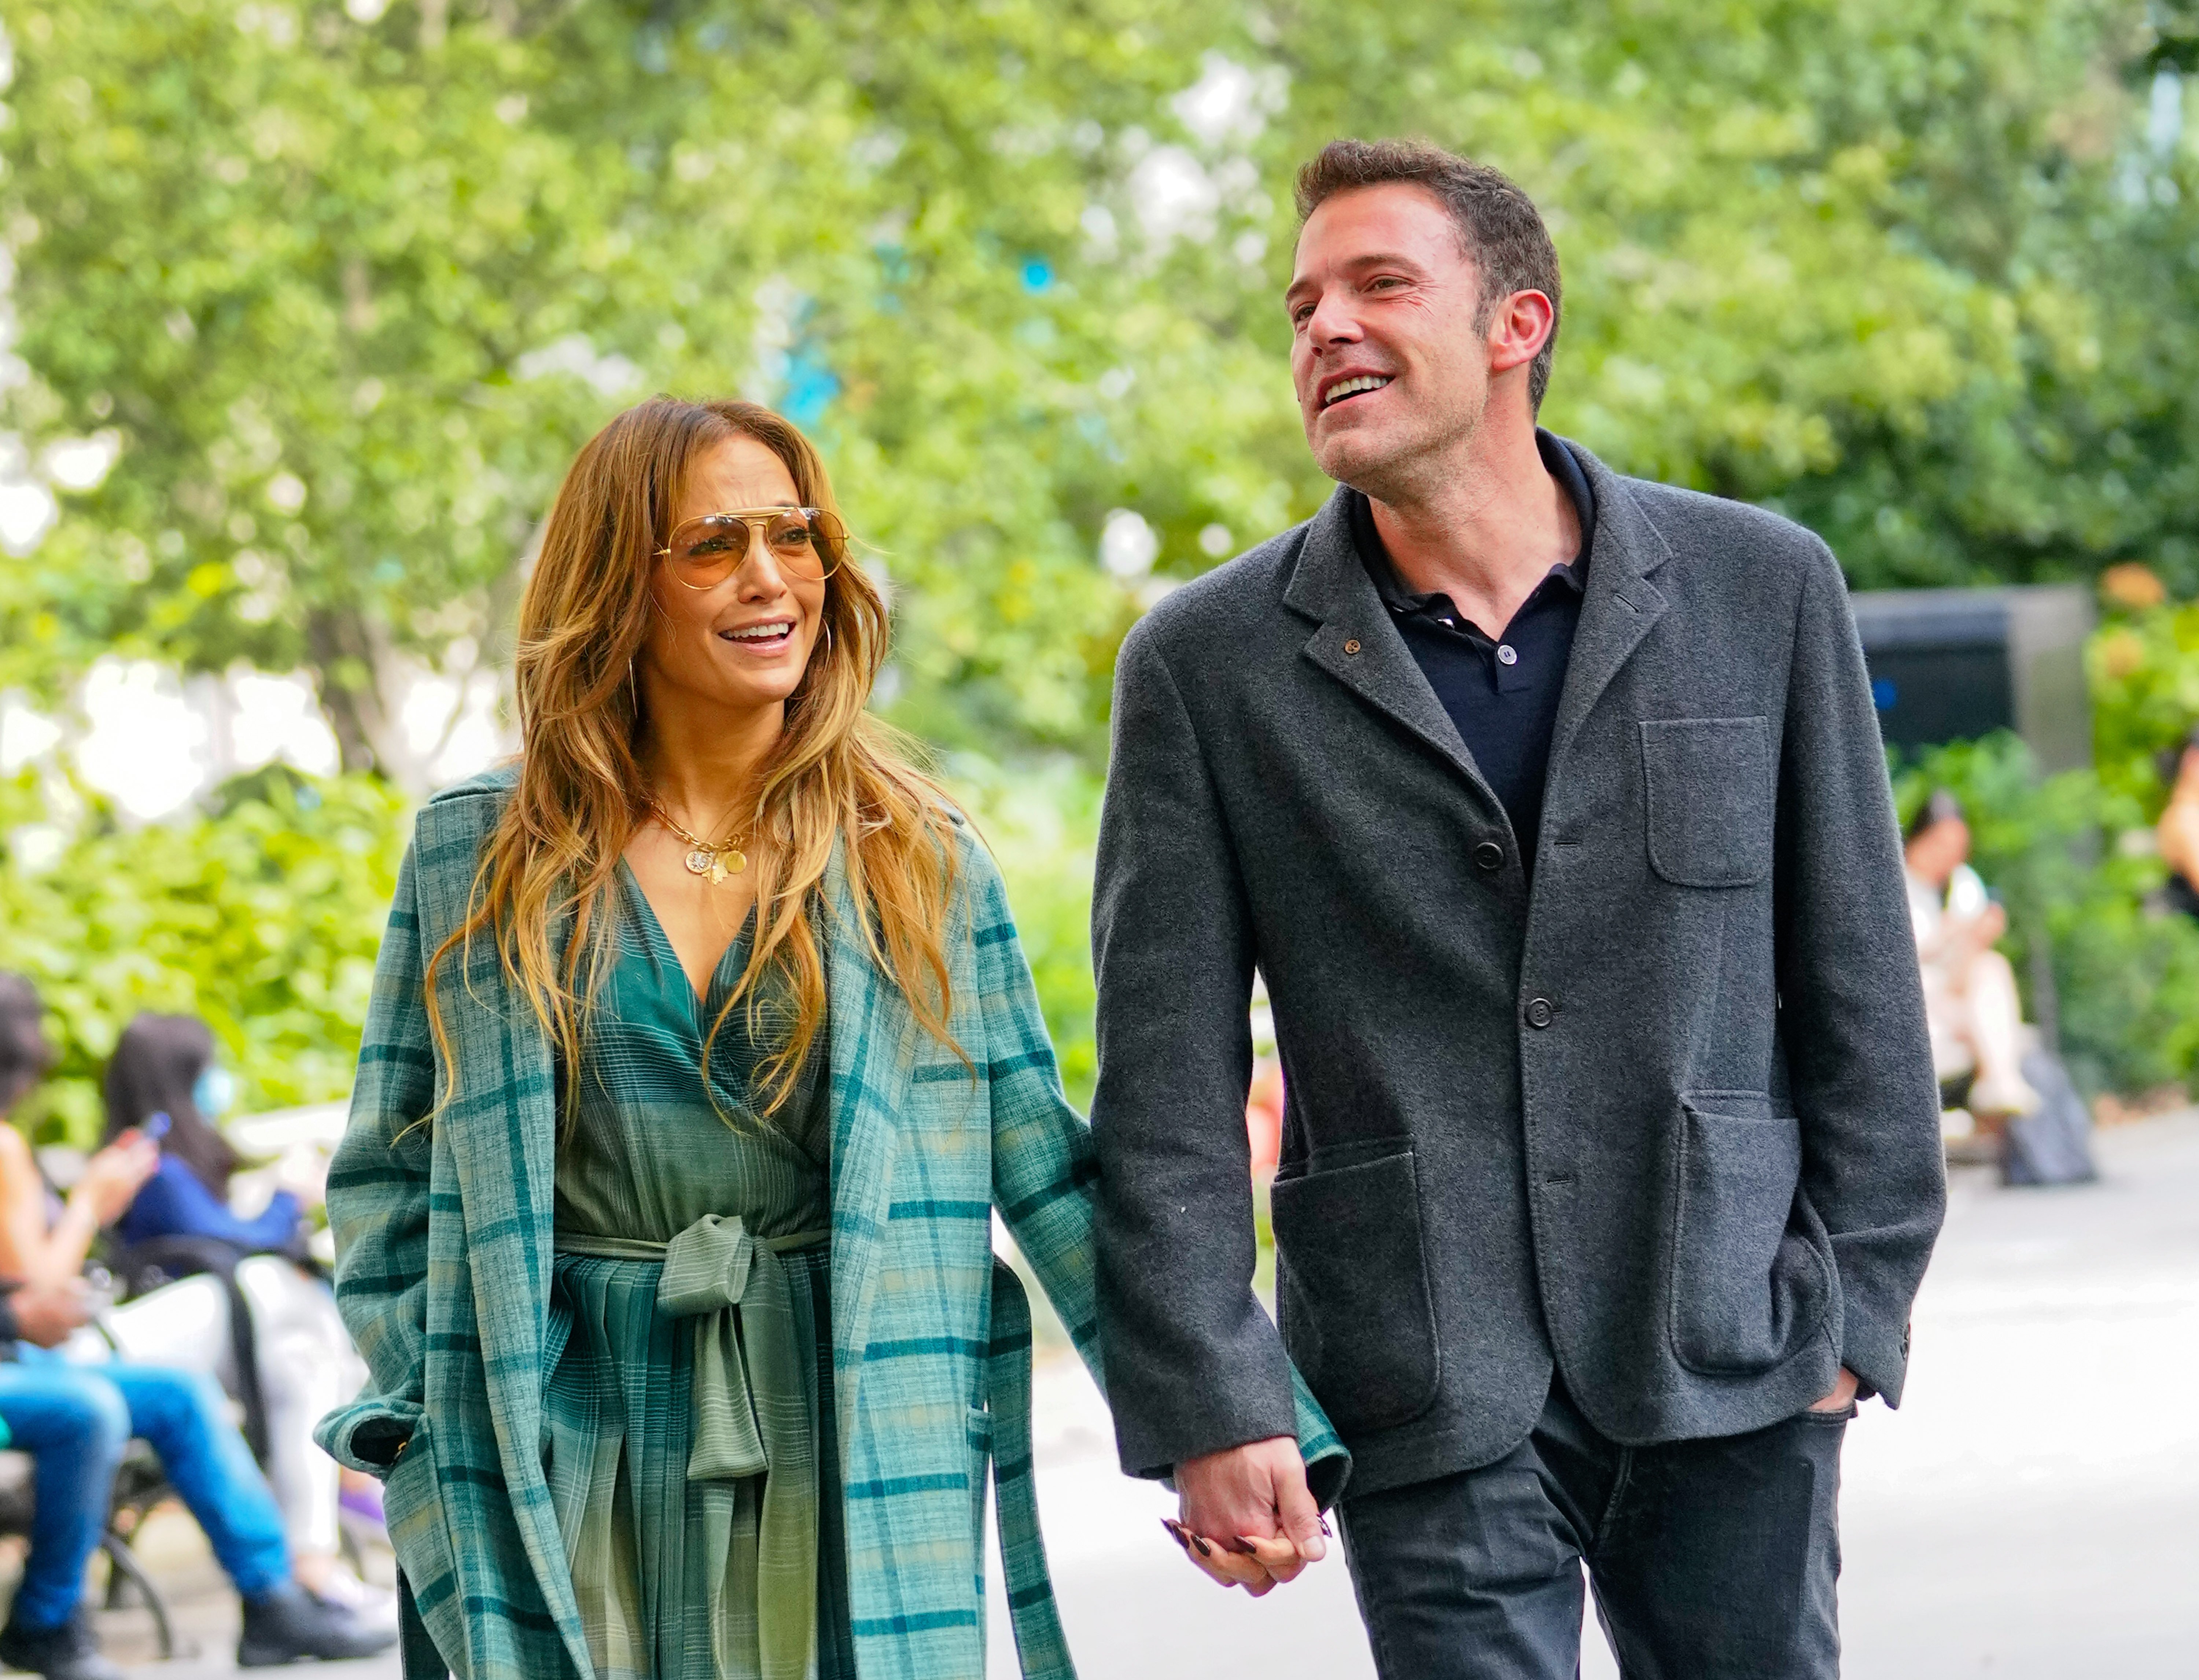 Jennifer Lopez and Ben Affleck spotted on September 25, 2021 in New York City┃Source: Getty Images